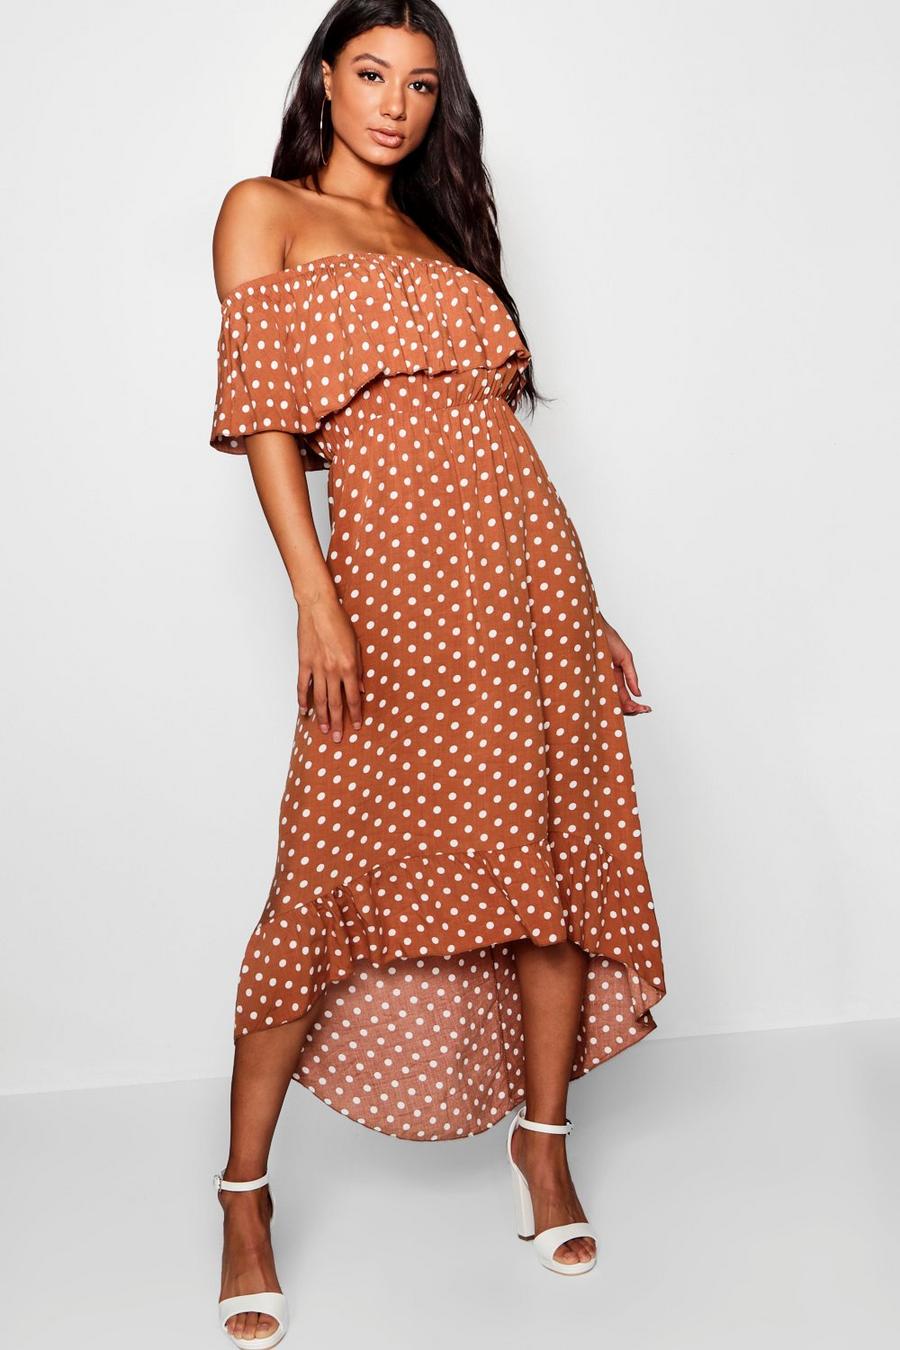 Chocolate Woven Polka Dot Print Off The Shoulder Maxi Dress image number 1